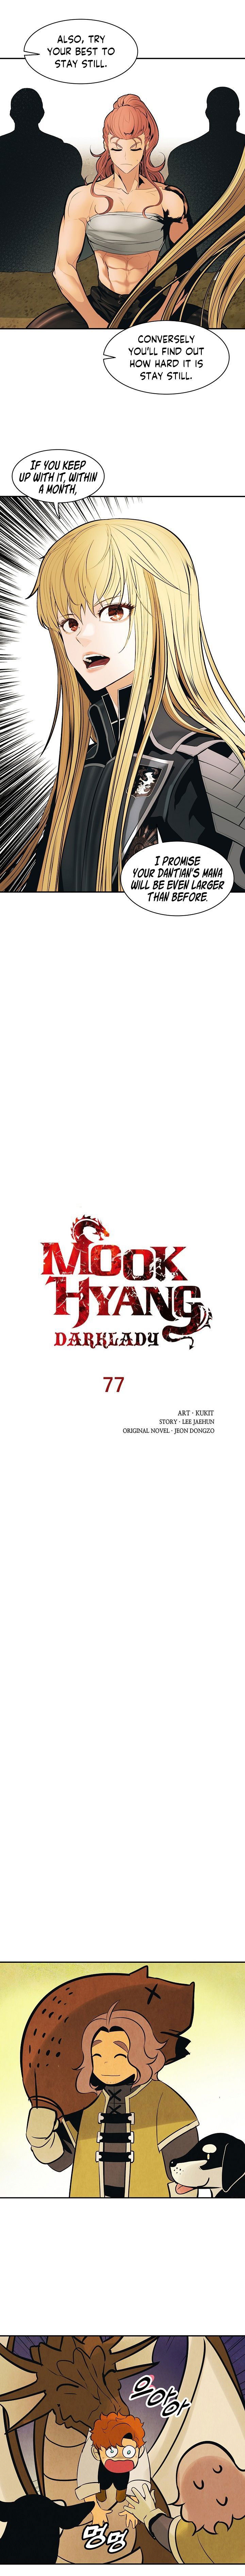 MookHyang - Dark Lady Chapter 77 page 3